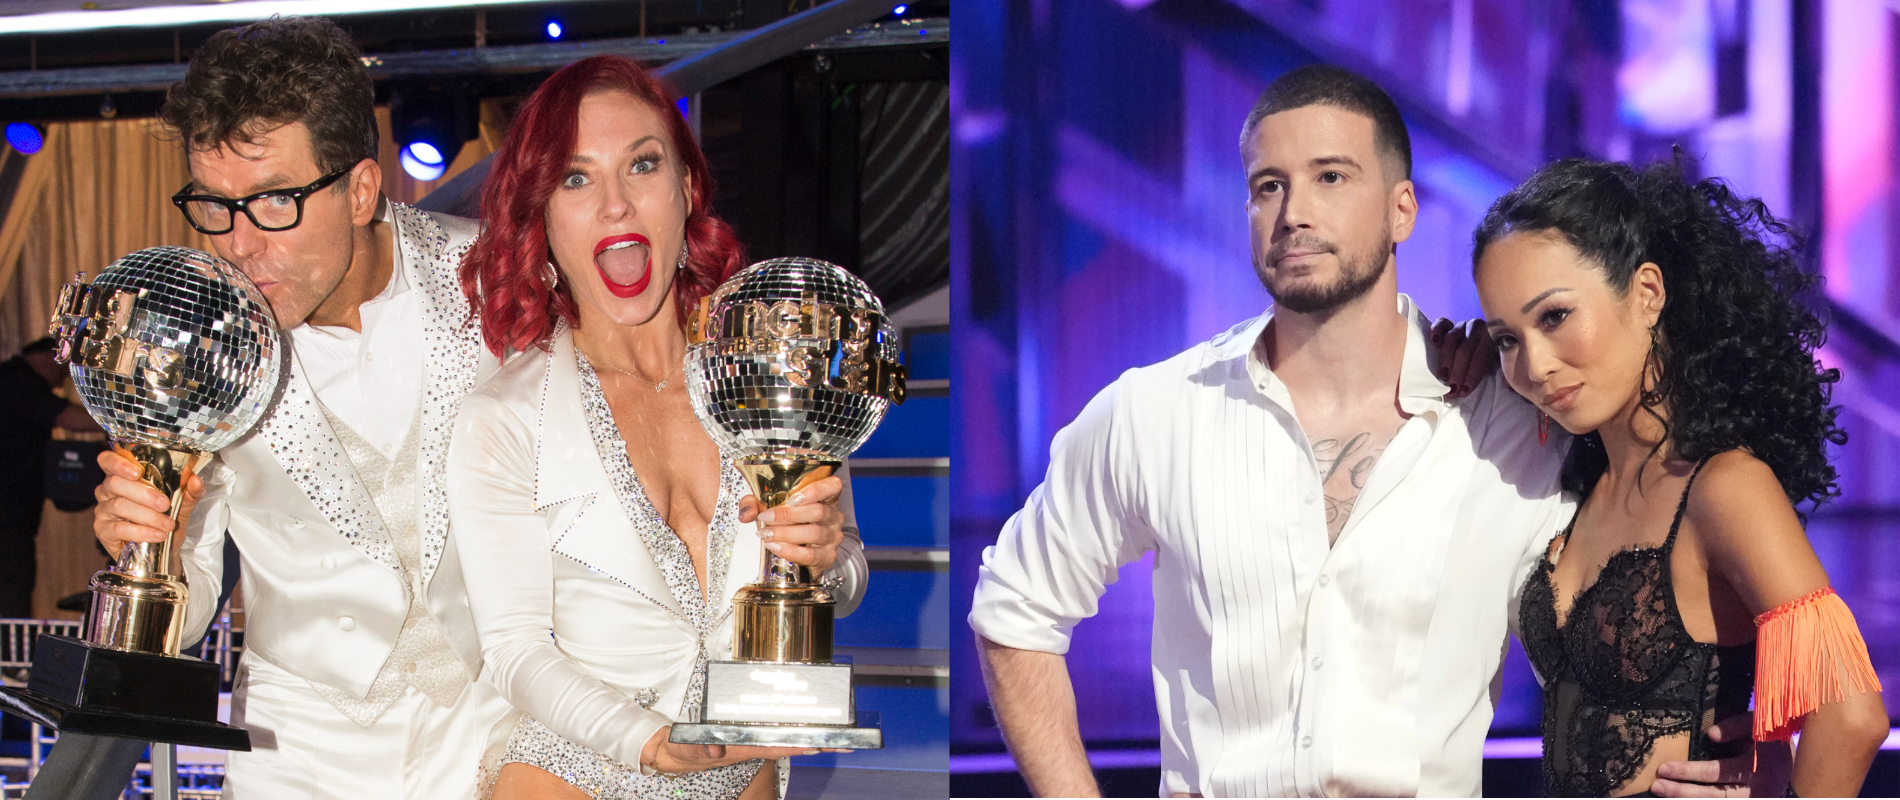 Will ‘Dancing With the Stars’ Vinny Guadagnino Take the Mantle From Bobby Bones as the Series Newest Underdog Winner?